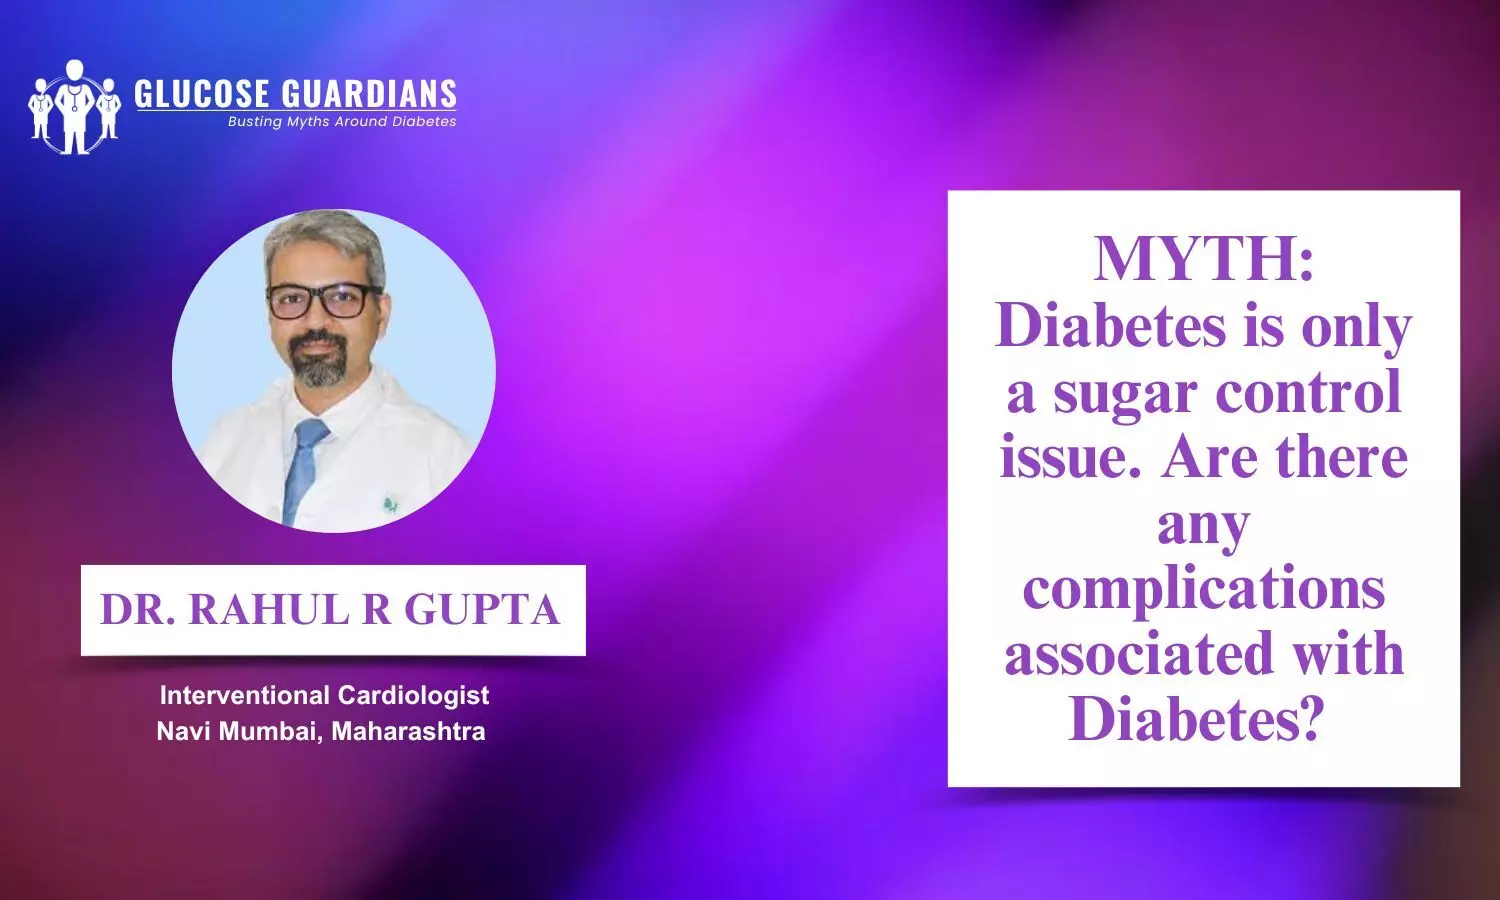 Debunking some myths related to diabetes, sugar control and its complications - Dr Rahul R Gupta